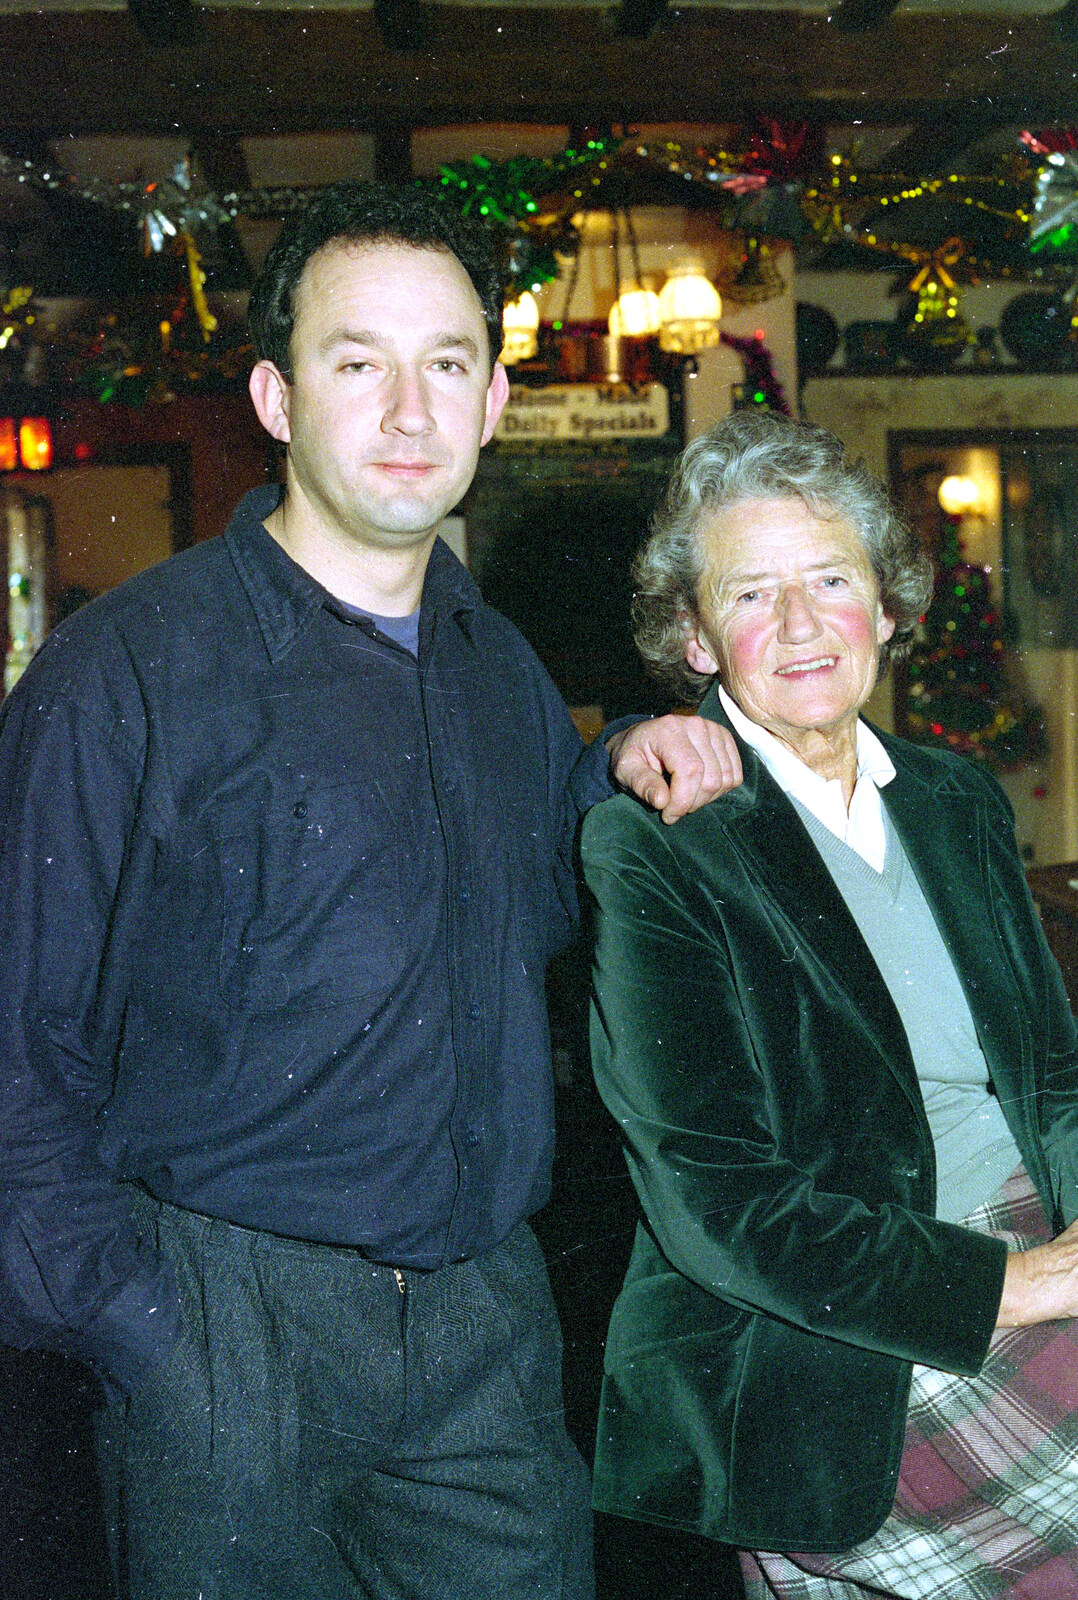 DH and his mum from New Year's Eve in the Swan Inn, Brome, Suffolk - 31st December 1995